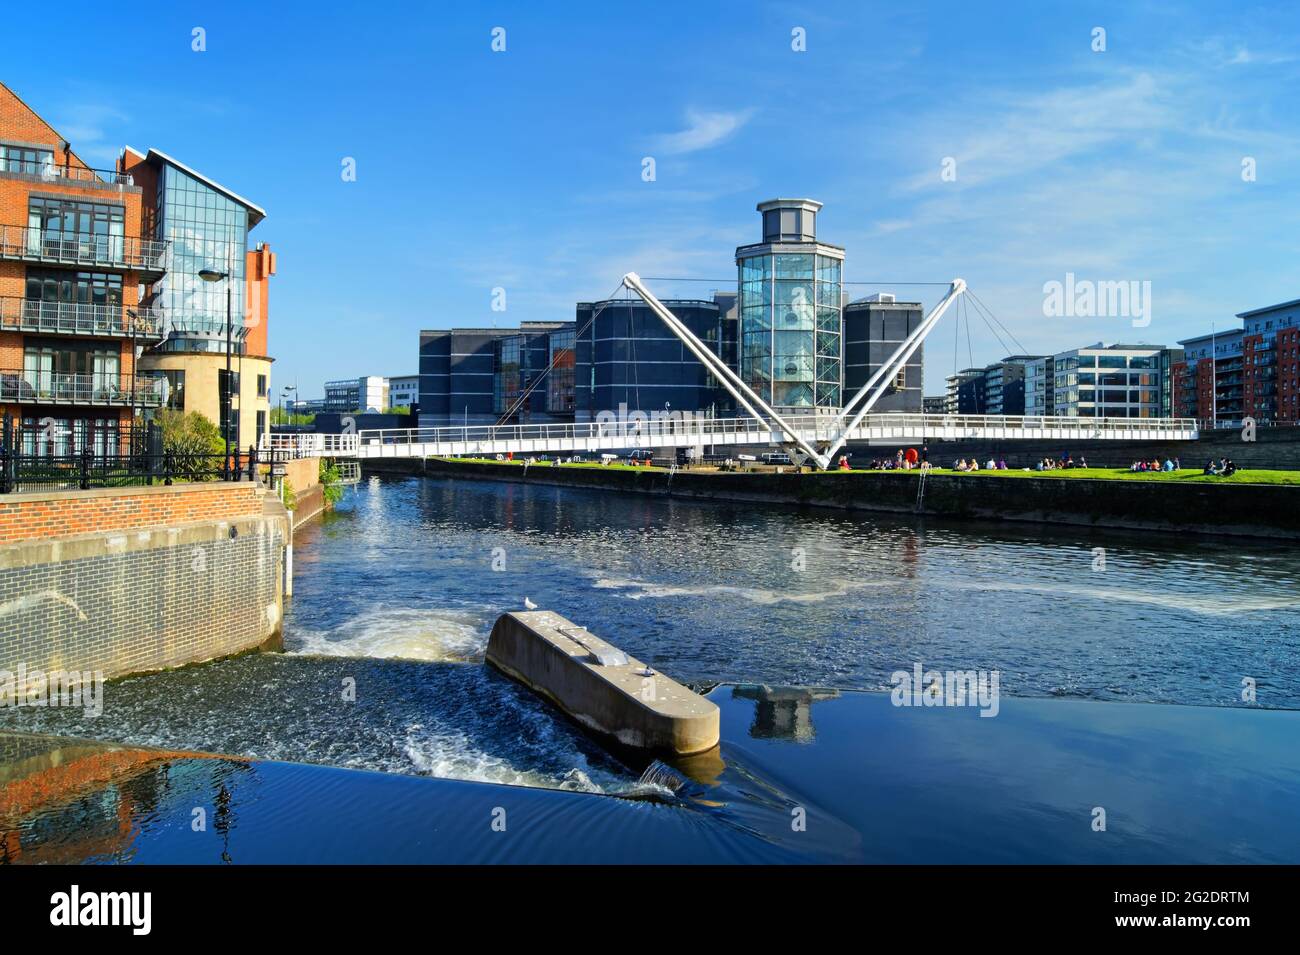 UK, West Yorkshire, Royal Armouries Museum, Leeds Dock, River Aire and Knights Way Bridge from Merchants Quay. Stock Photo